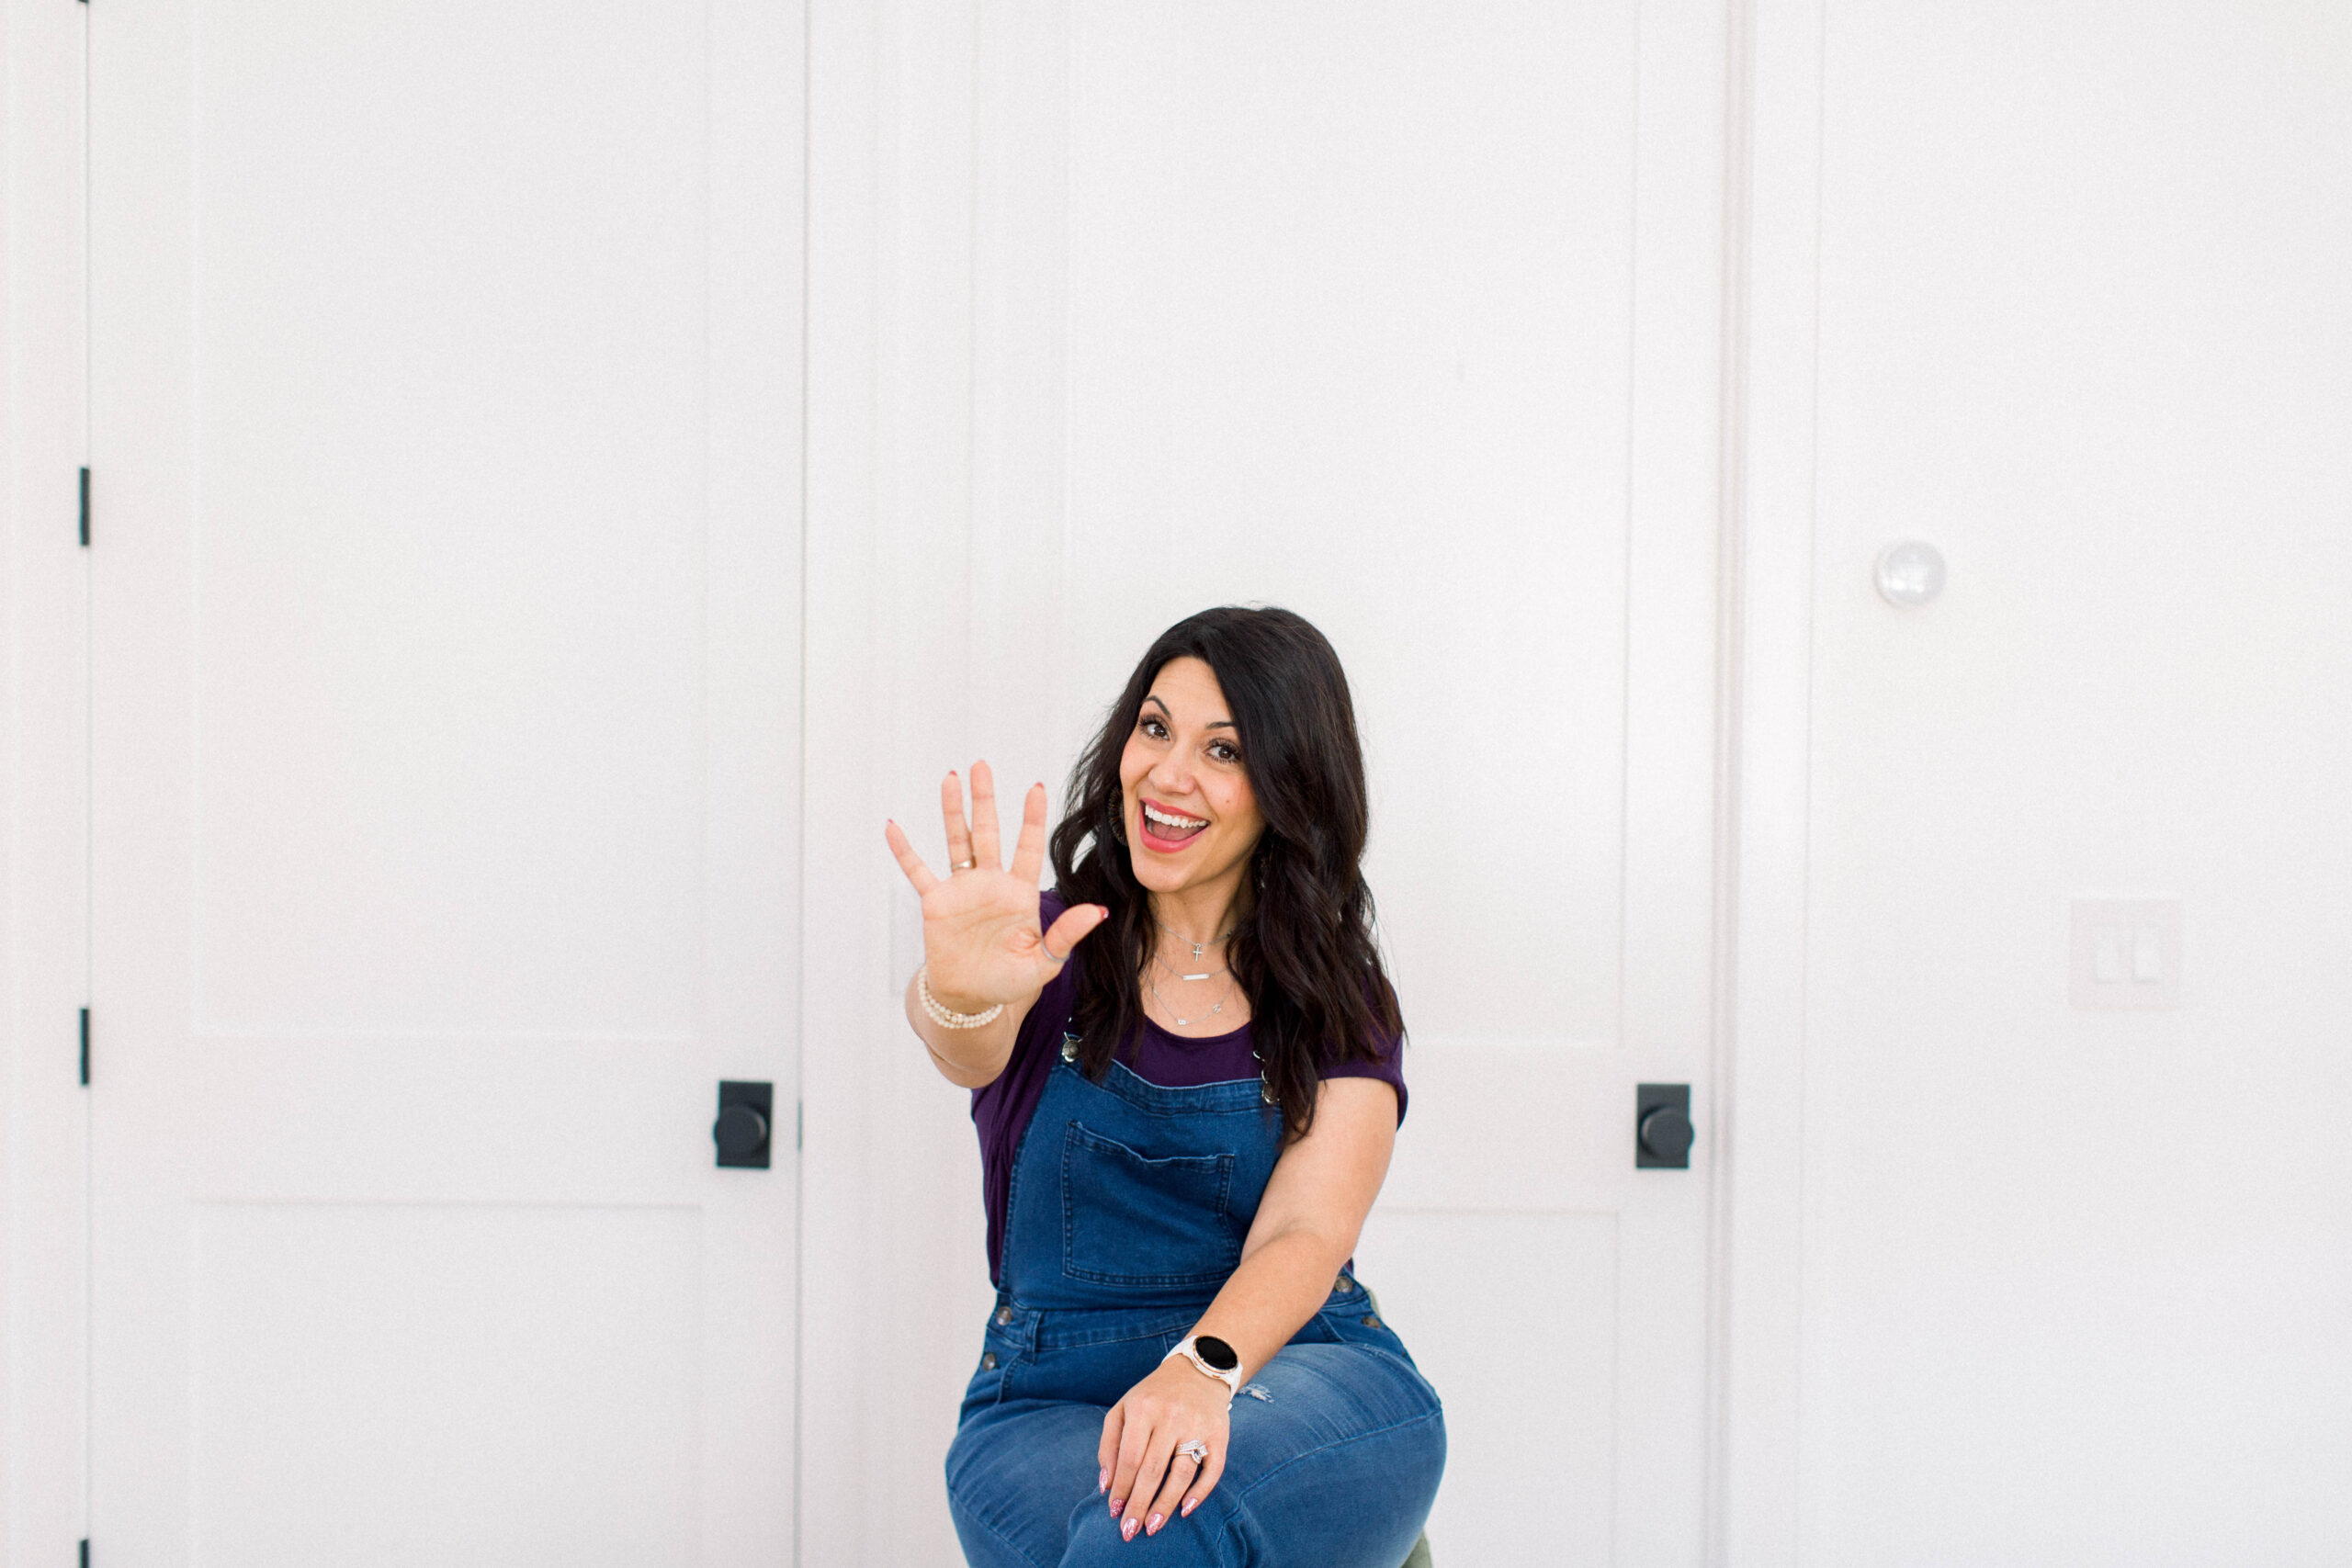 dark haired woman sitting against a white wall wearing a blue shirt and jeans. She is holding up her right hand with five fingers spread out. Title is 5 Steps to Creating a Passive Income Business Fueled by Your Podcast